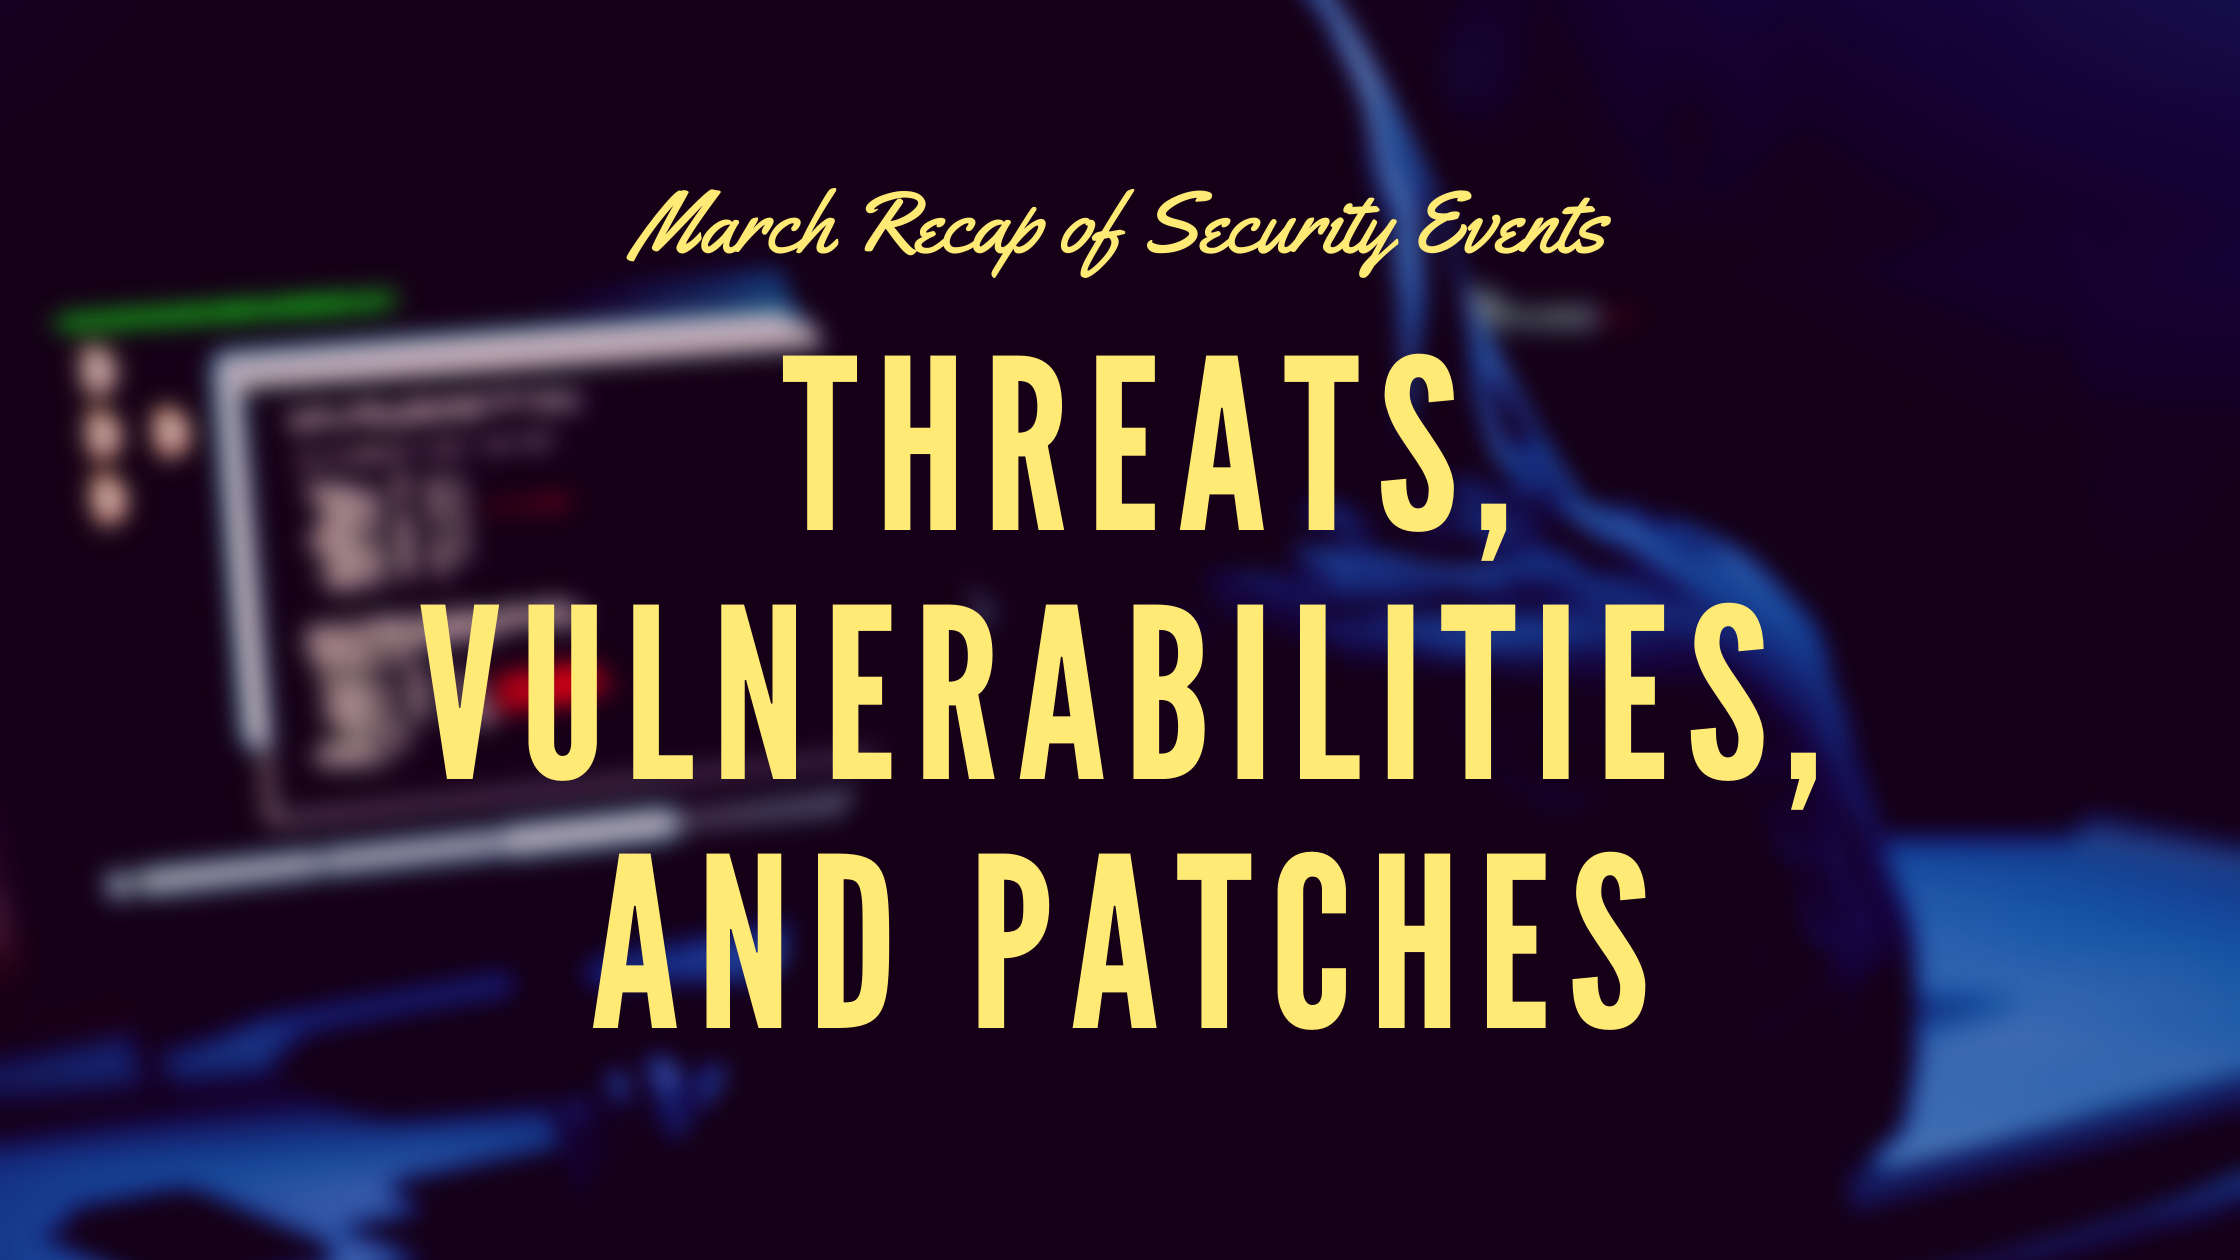 [Security Tip] March Security Threats Summarized